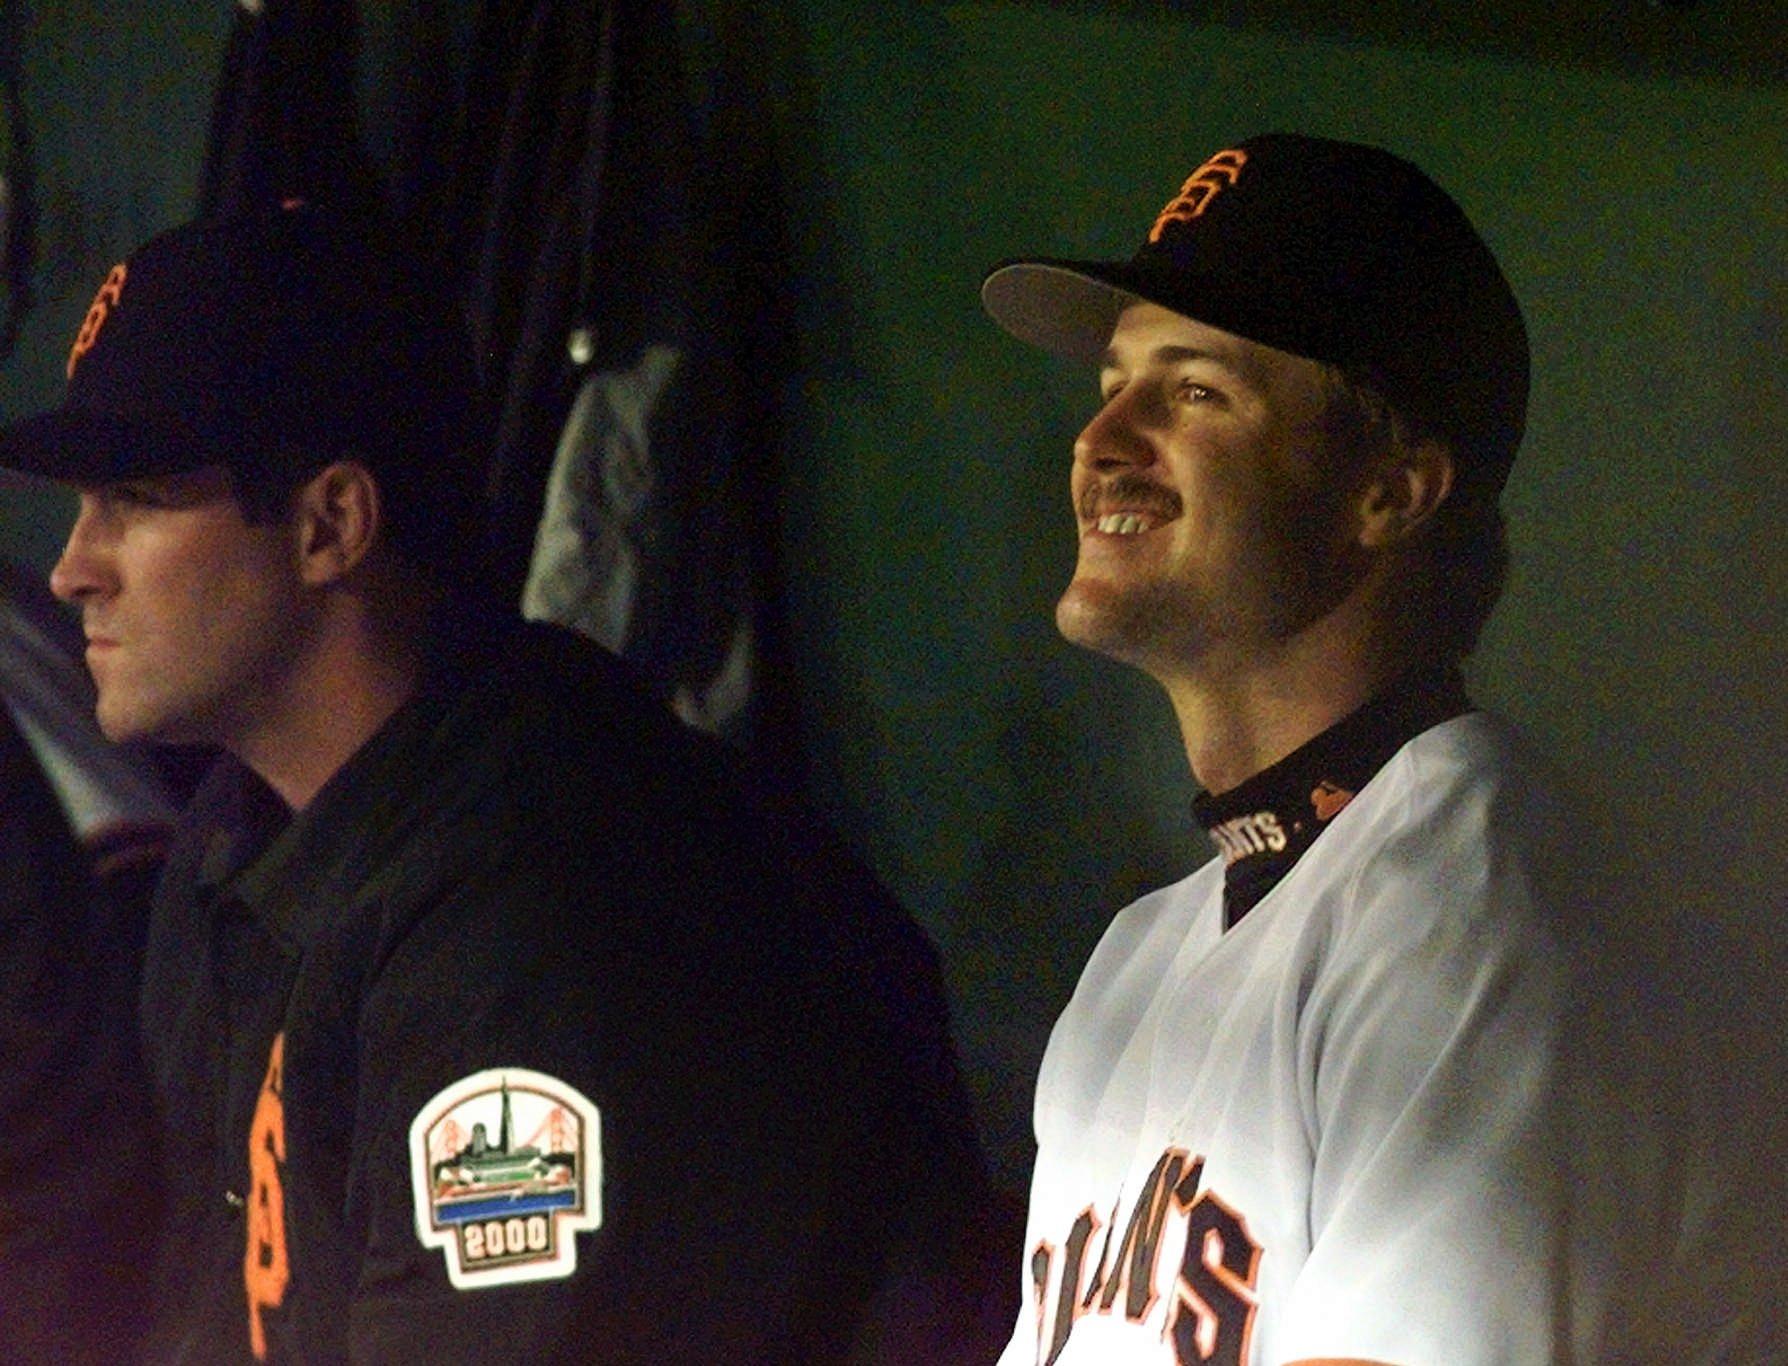 How far away is Jeff Kent from making the Hall of Fame? - McCovey Chronicles